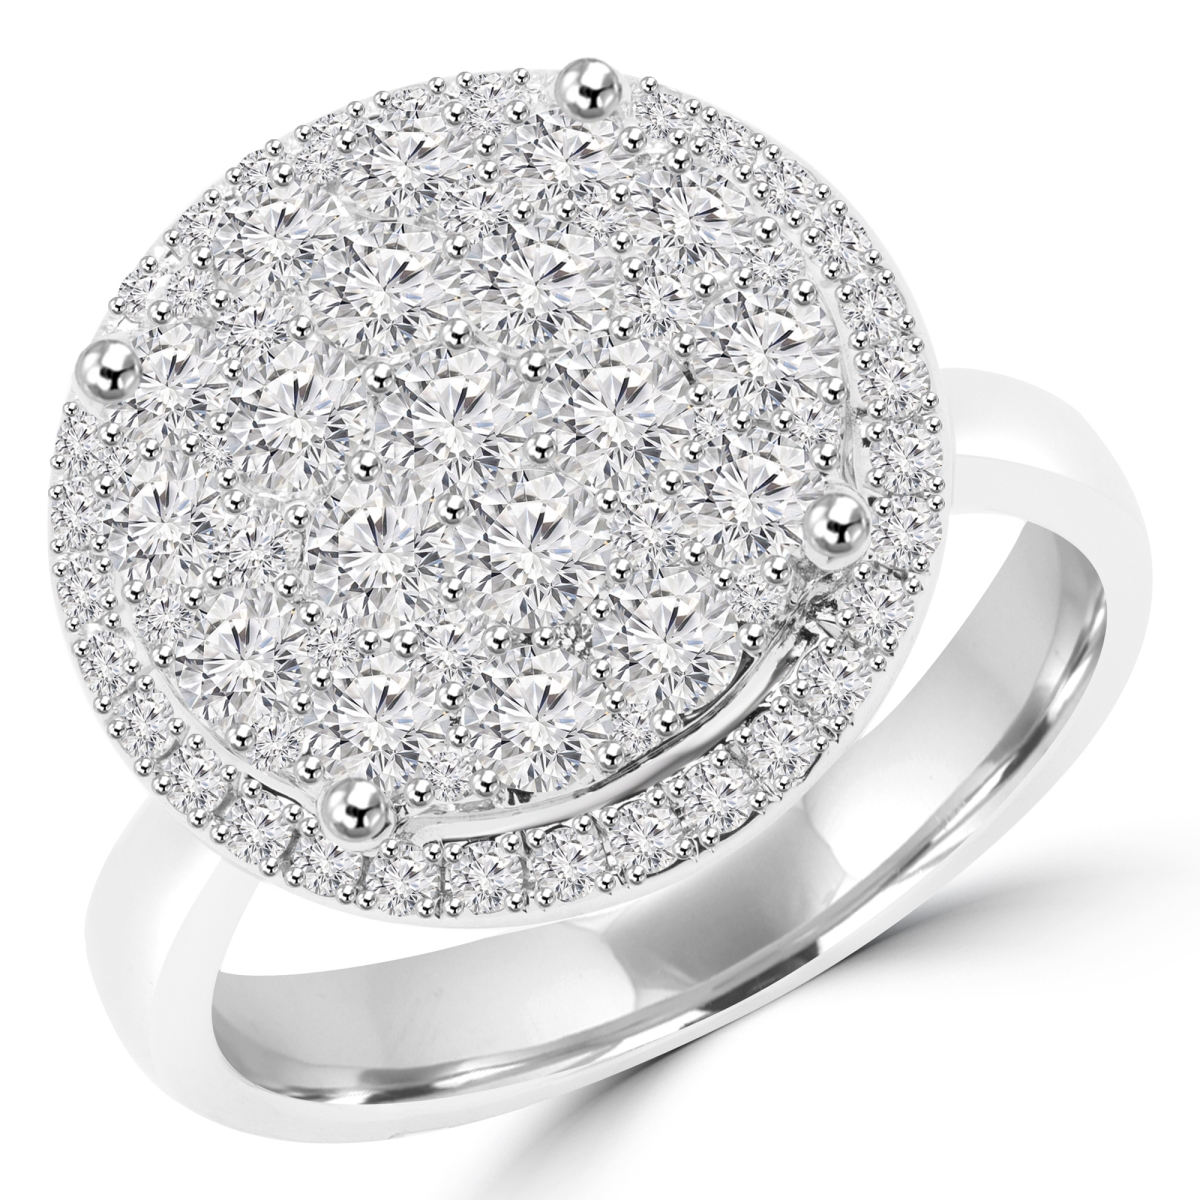 MD160293-3.25 1.5 CTW Pave Set Diamond Cluster Fashion Engagement Ring in 18K White Gold, Size 3.25 -  Majesty Diamonds